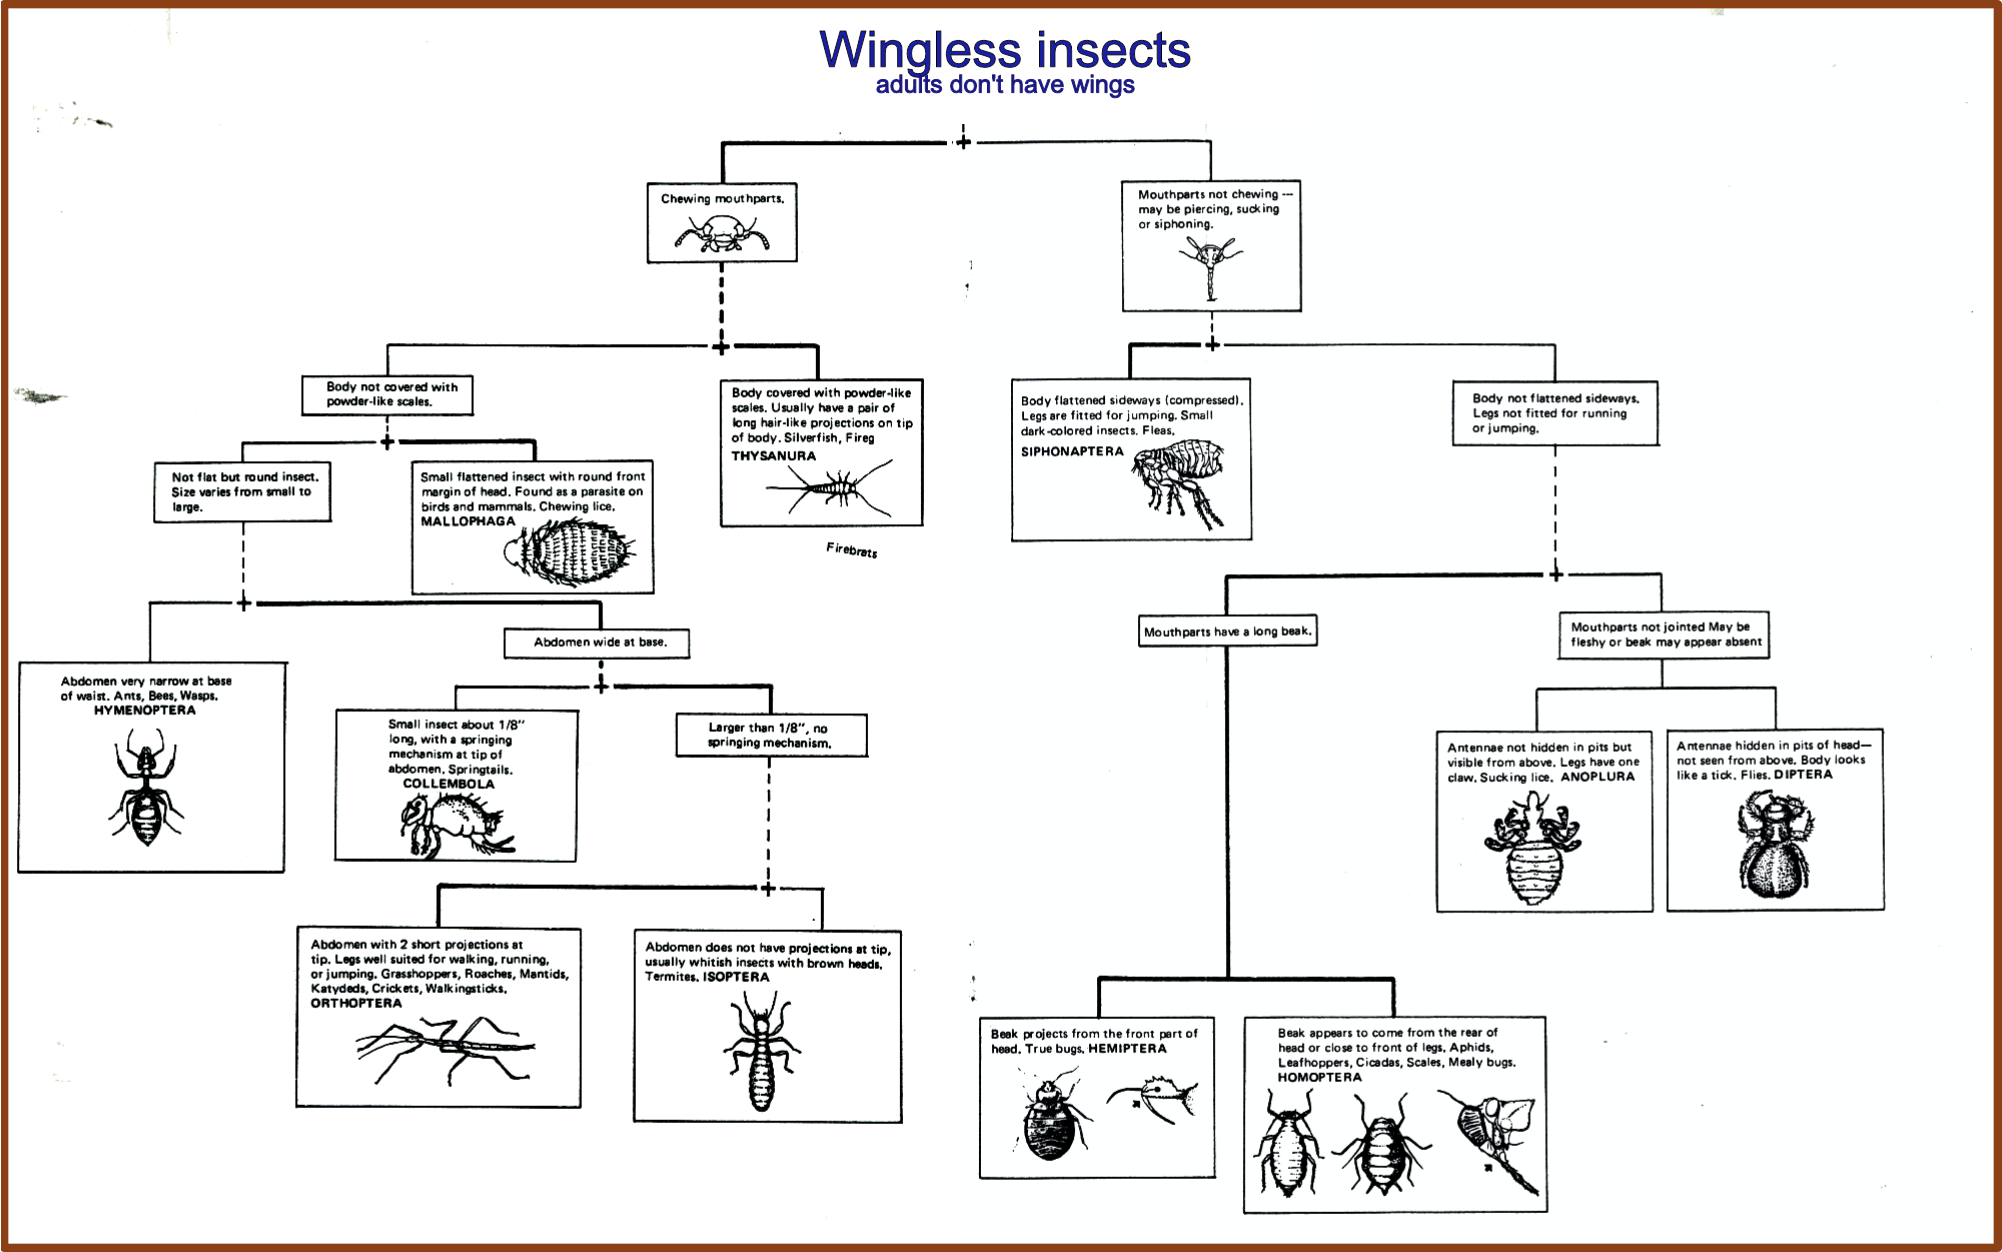 Wingless insect key